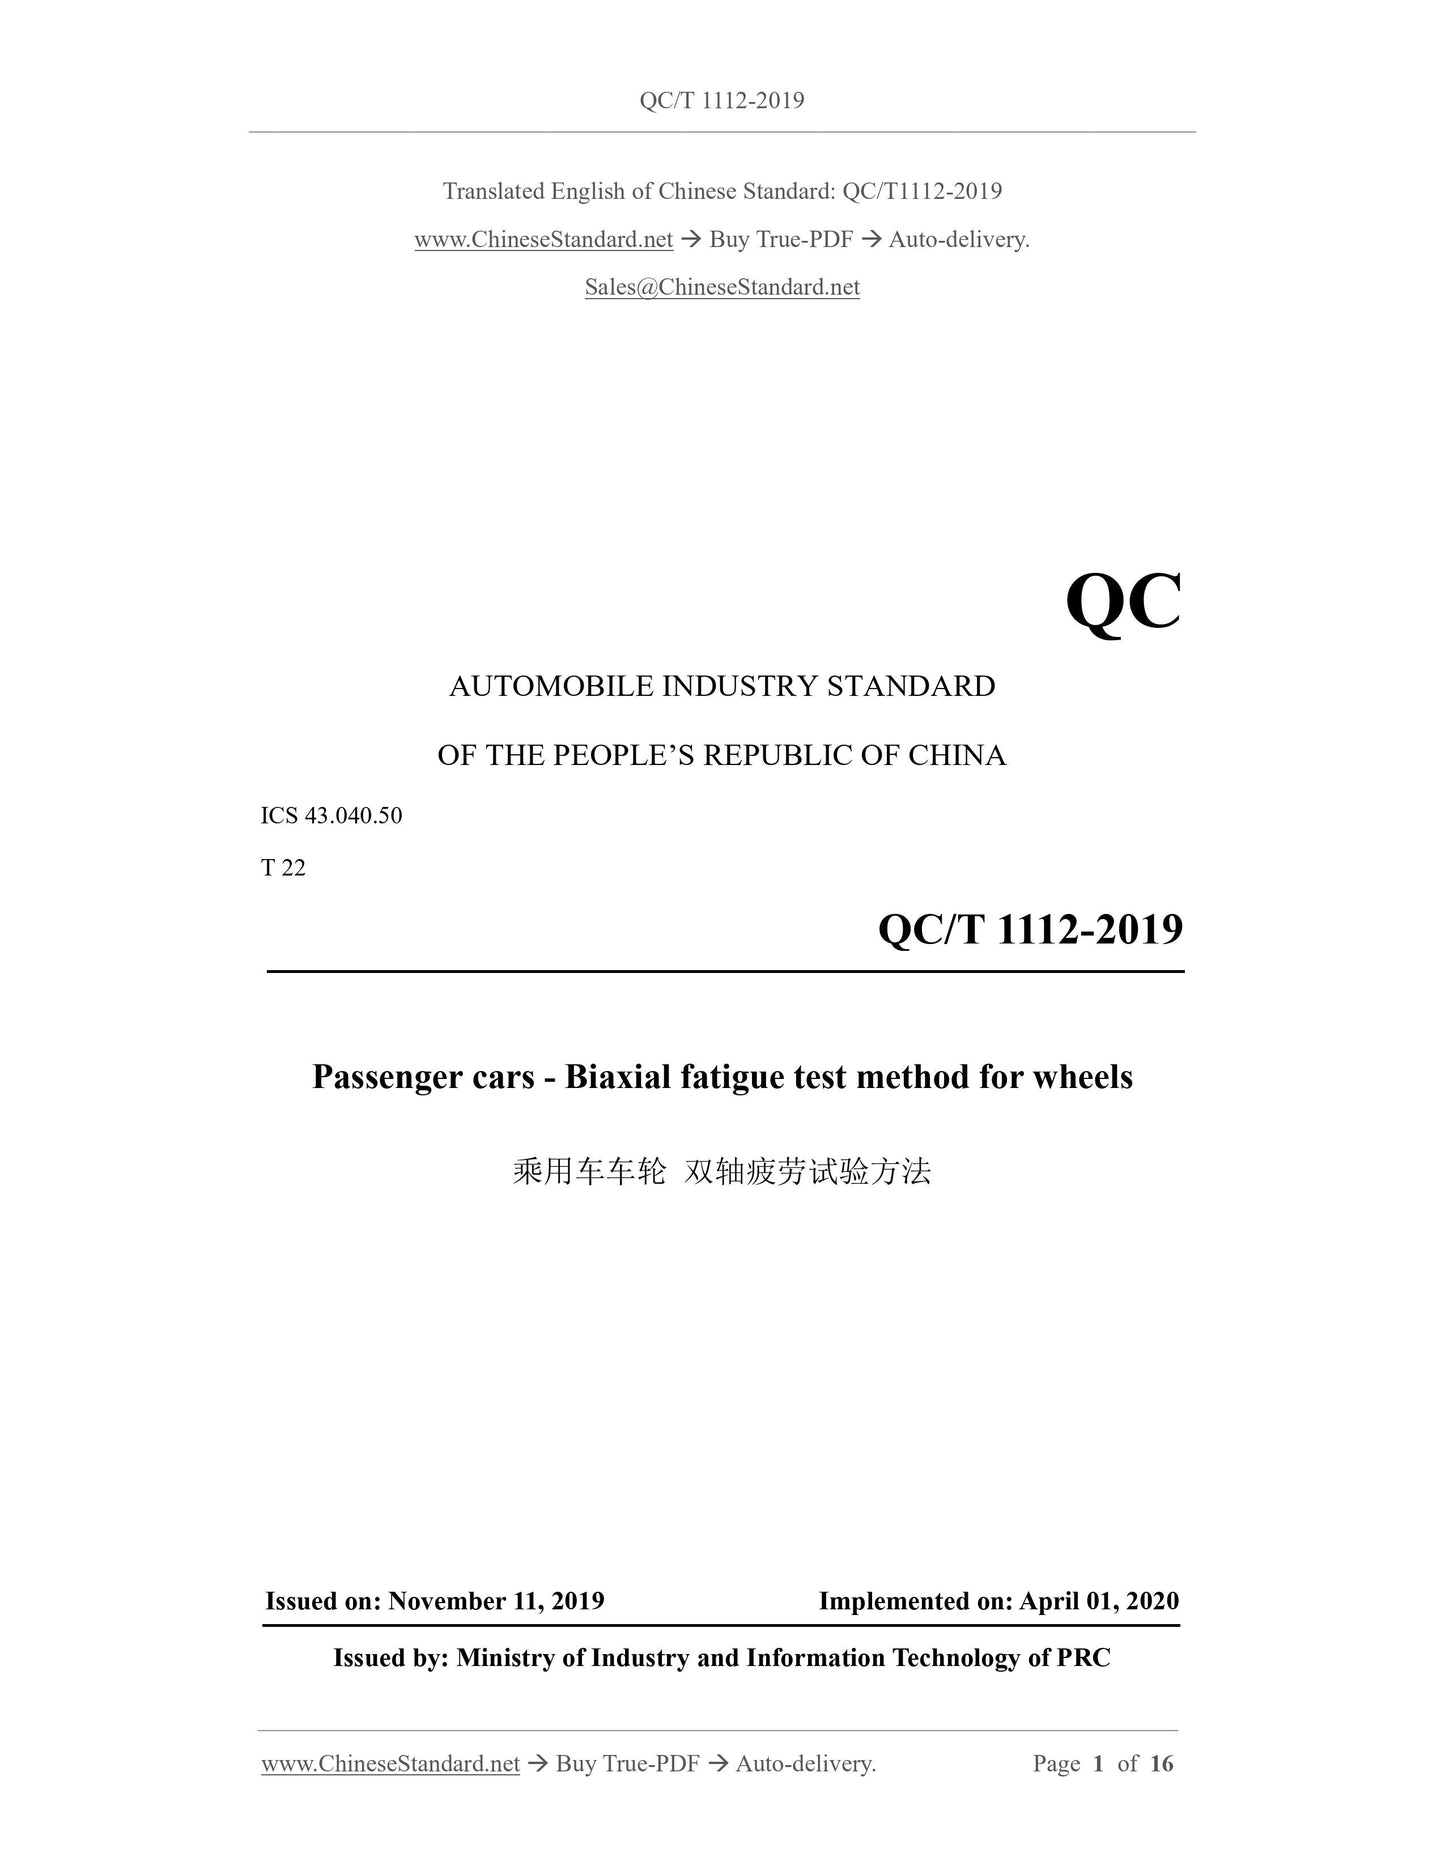 QC/T 1112-2019 Page 1